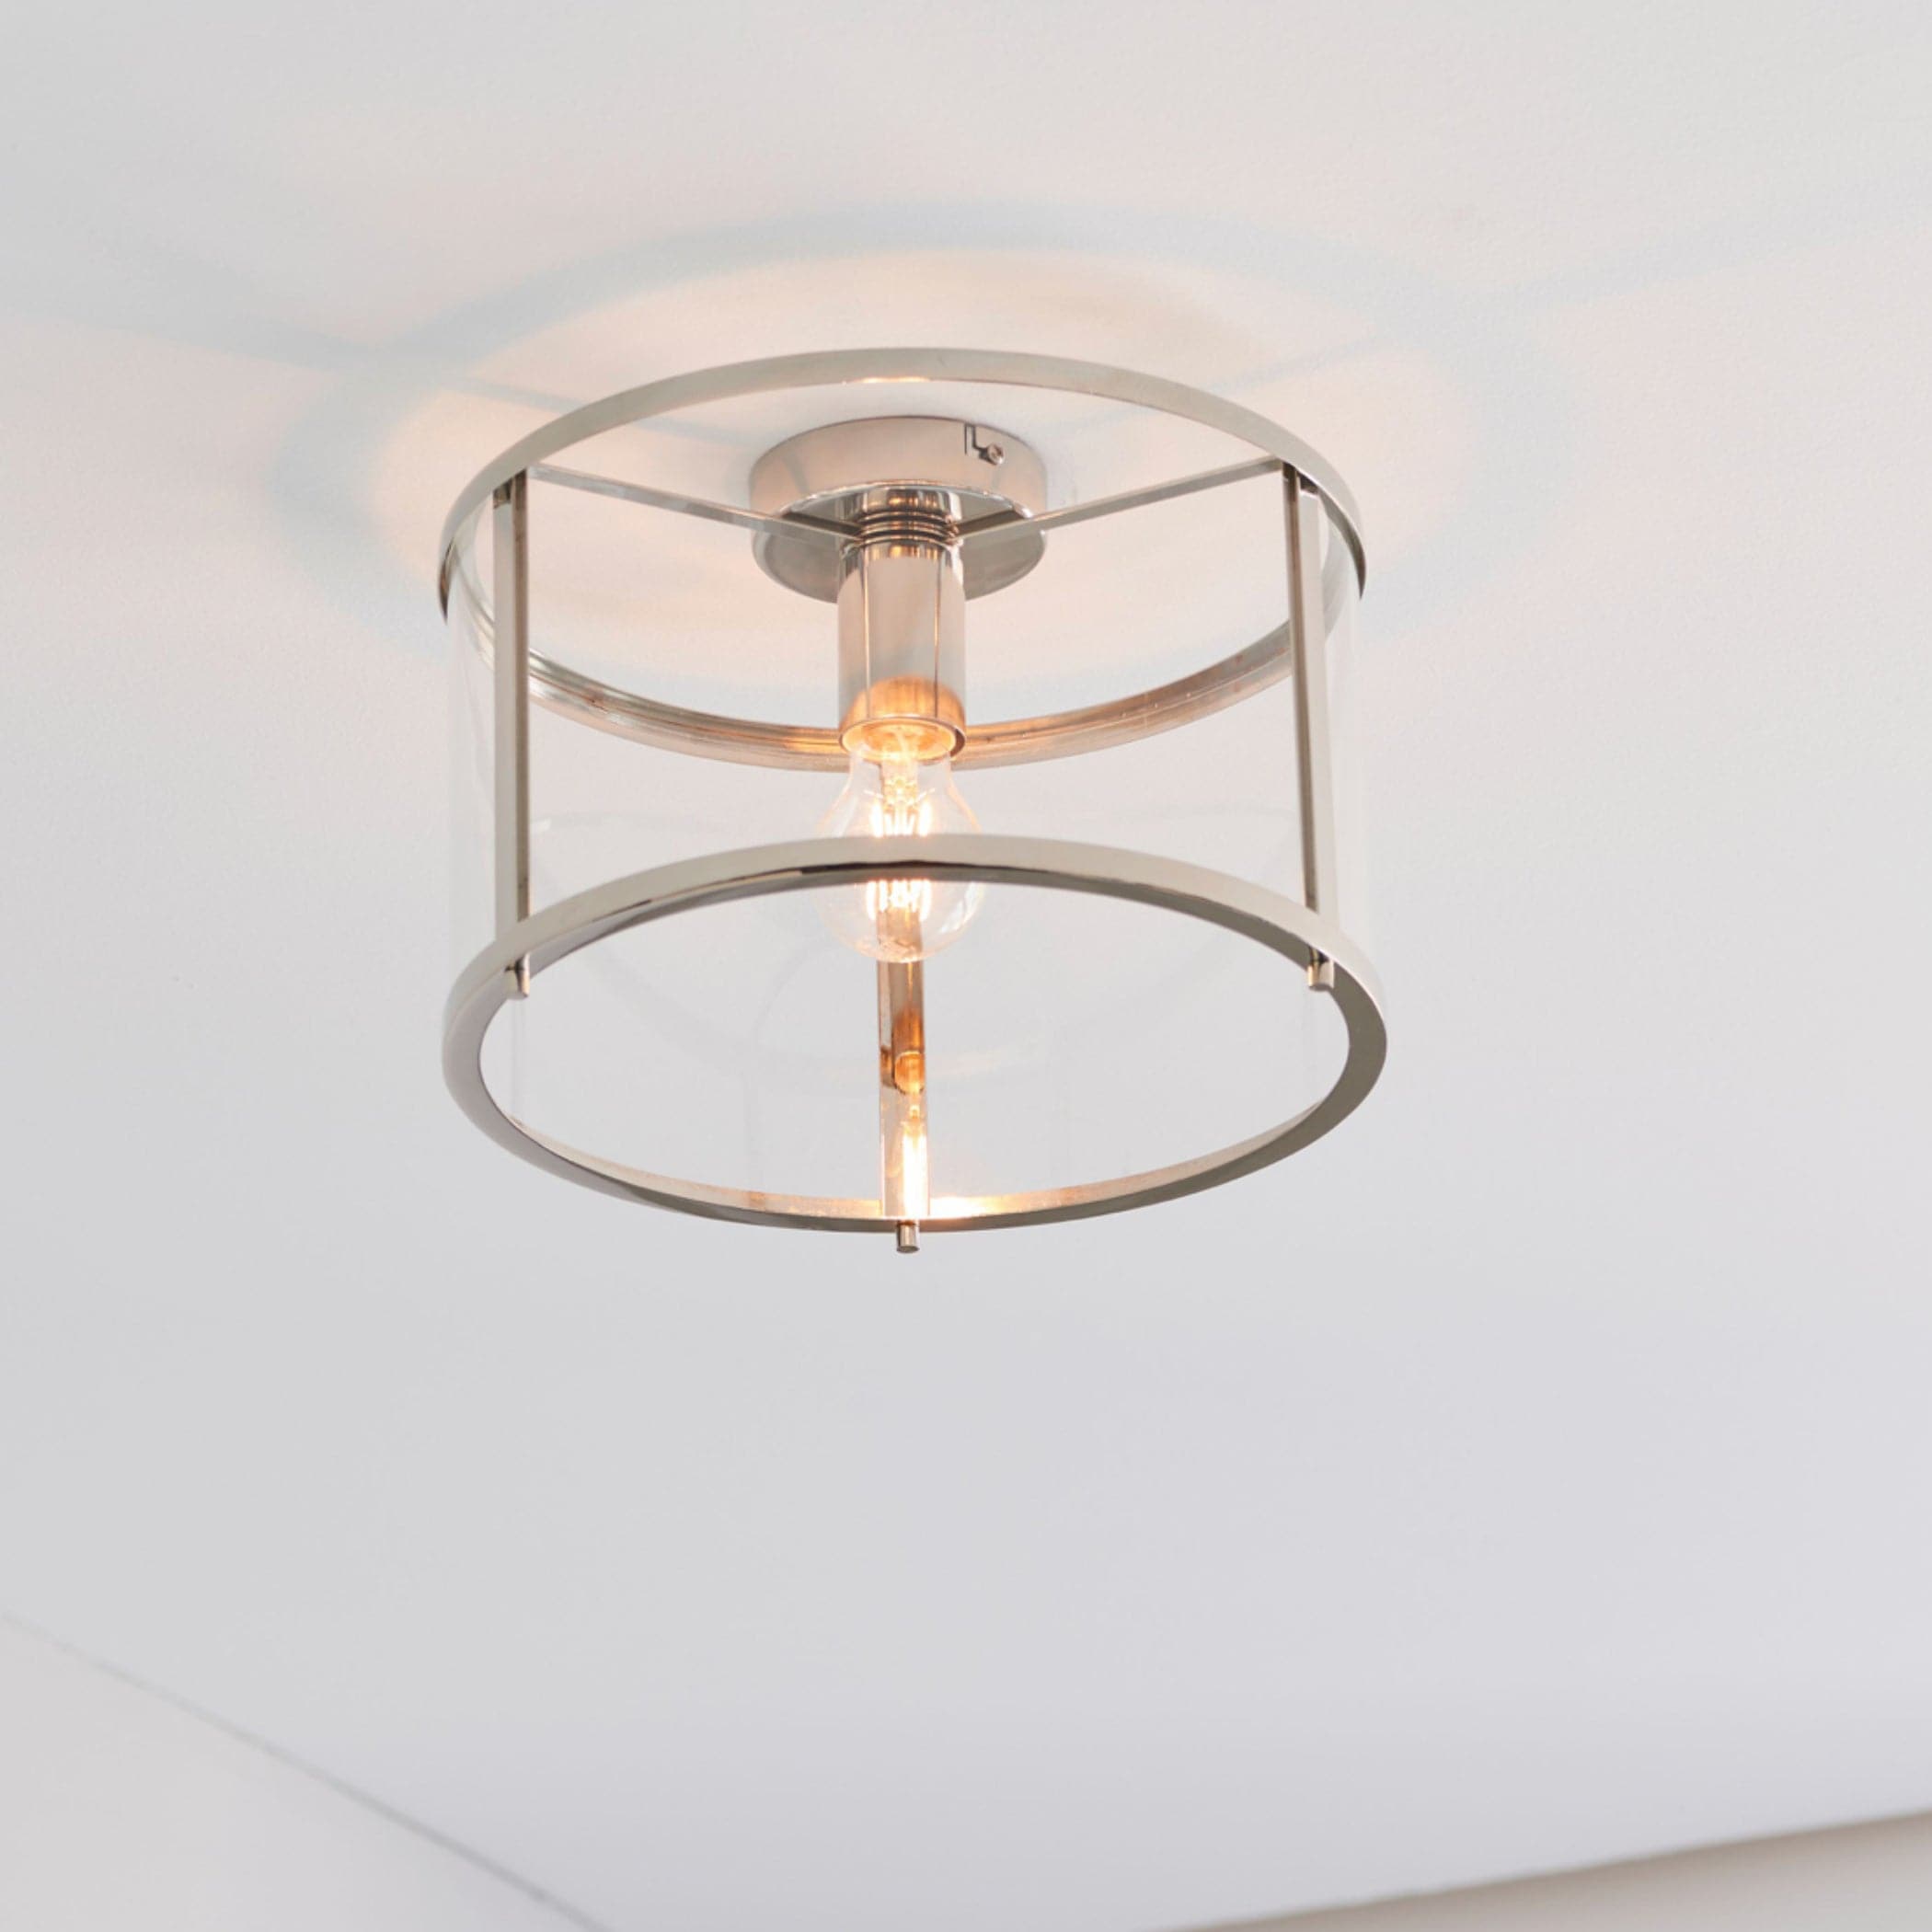 Round Nickel and Glass Ceiling Light